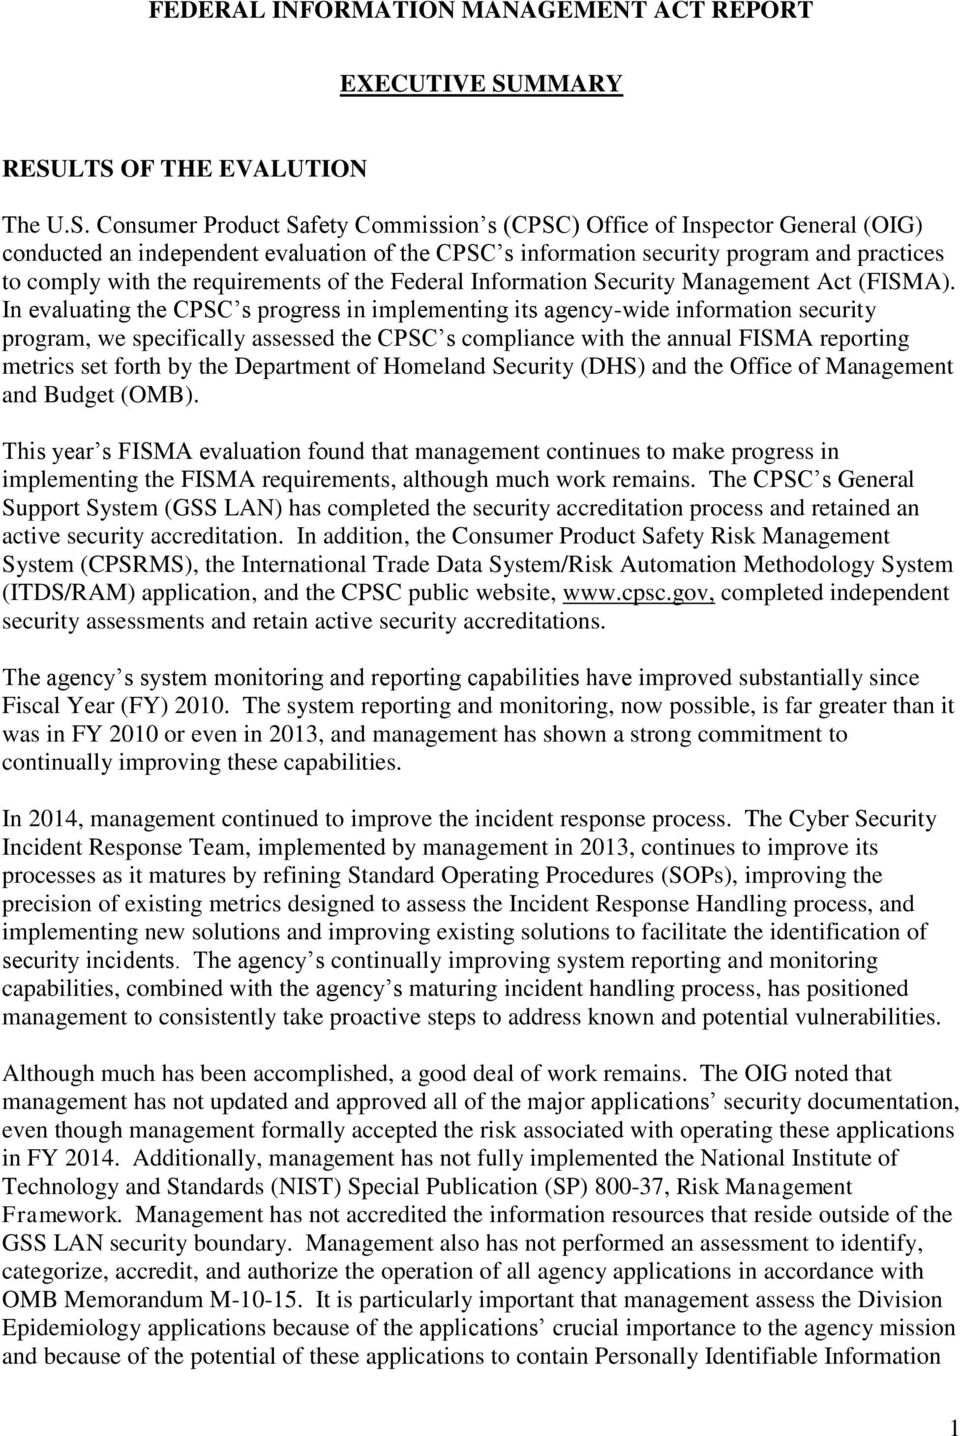 LTS OF THE EVALUTION The U.S. Consumer Product Safety Commission s (CPSC) Office of Inspector General (OIG) conducted an independent evaluation of the CPSC s information security program and